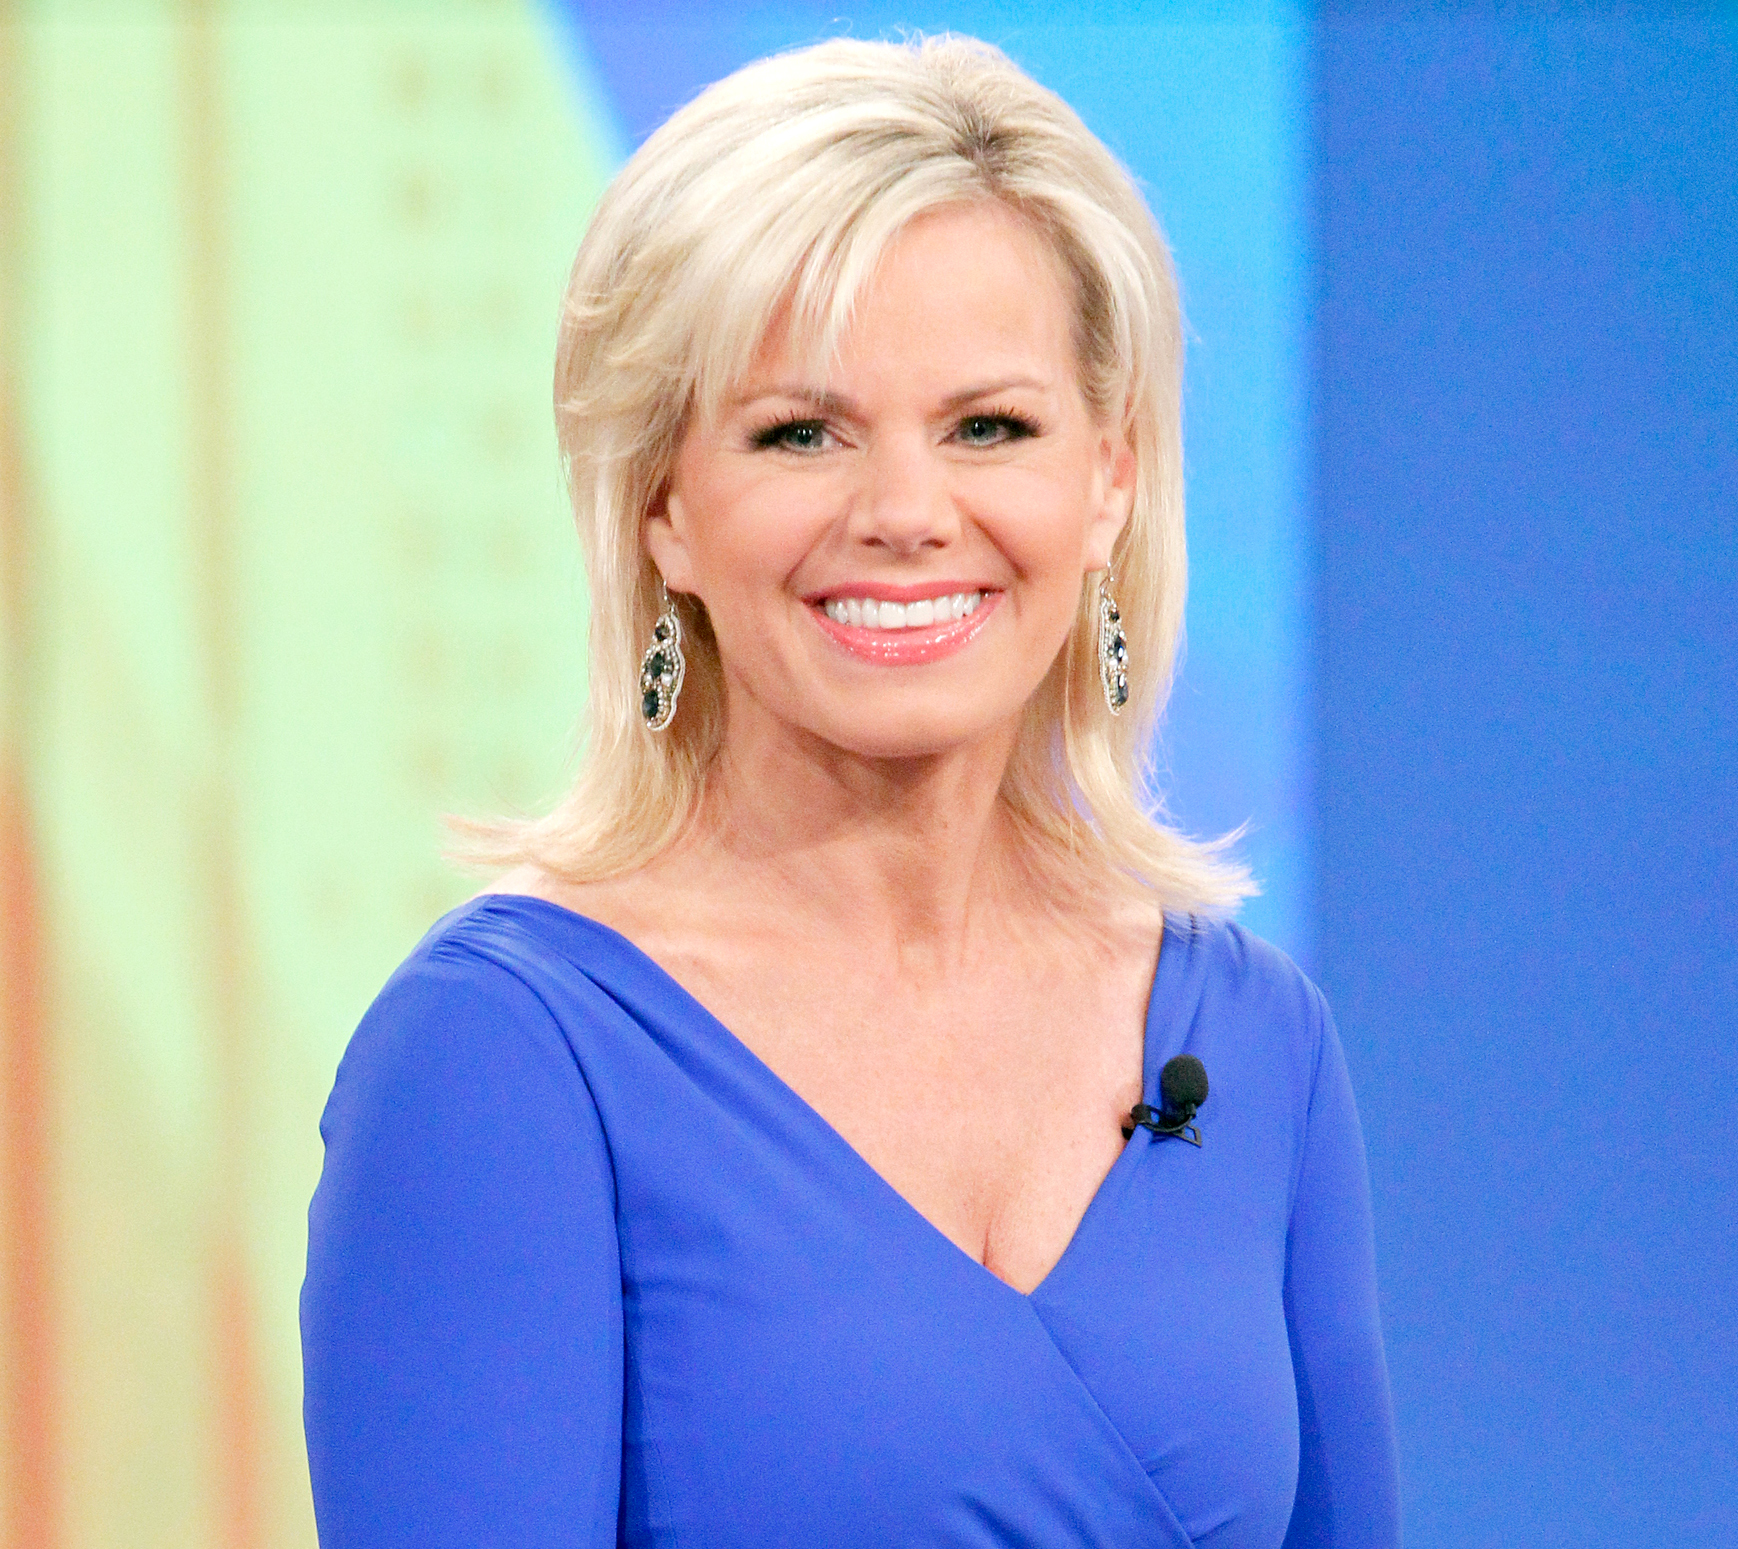 Gretchen Carlson Sexy Videos - Gretchen Carlson Survived a Tornado: 25 Things You Don't Know About Me